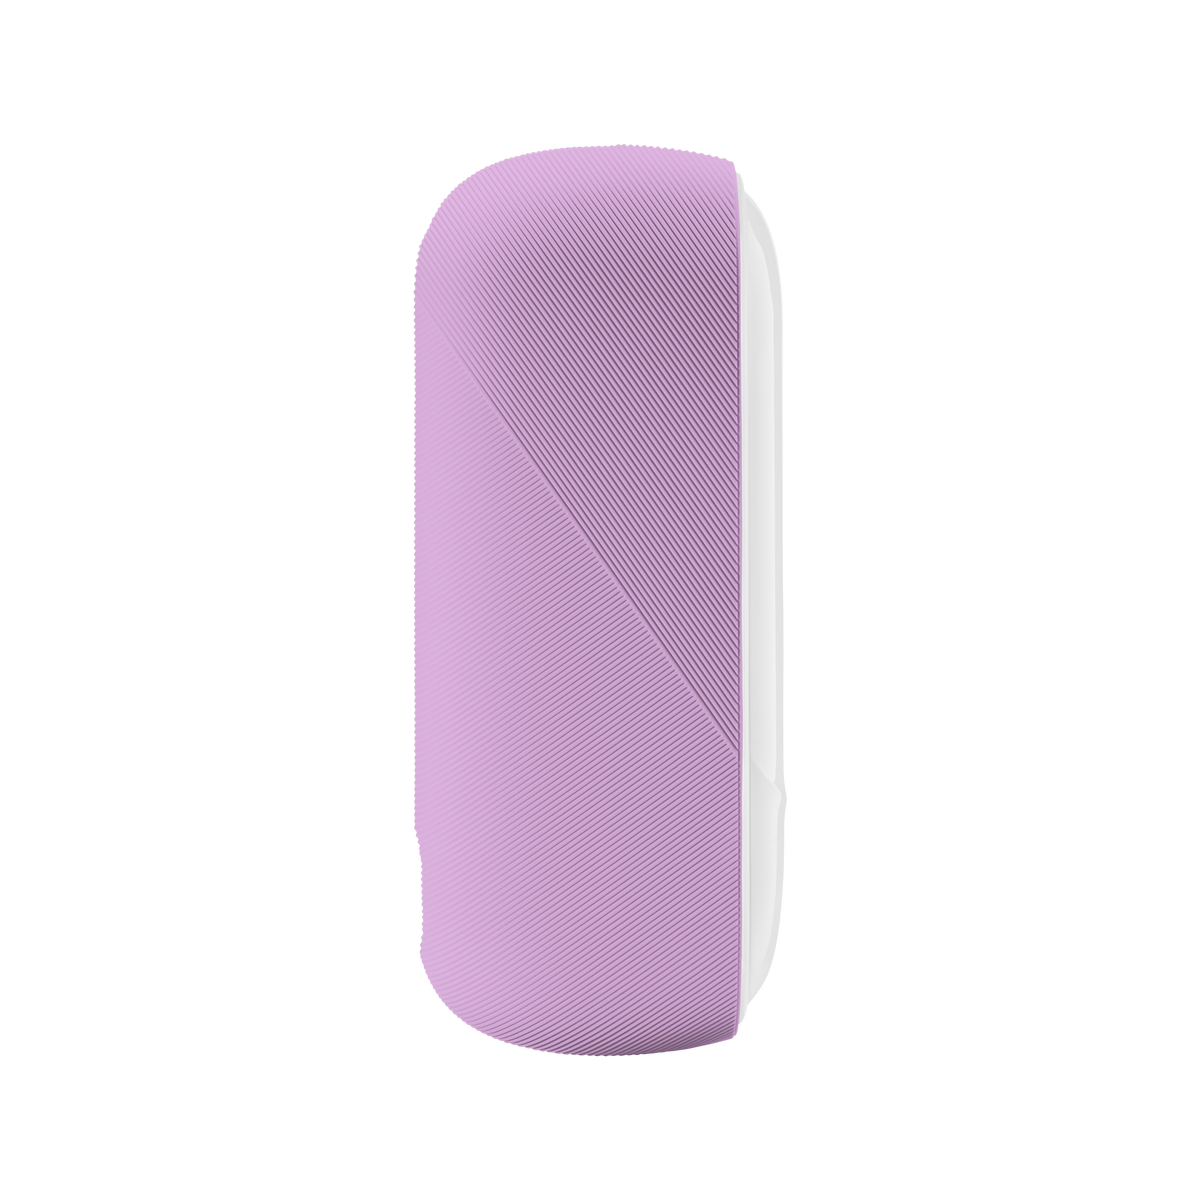 Topaz Purple Silicon Sleeve.png